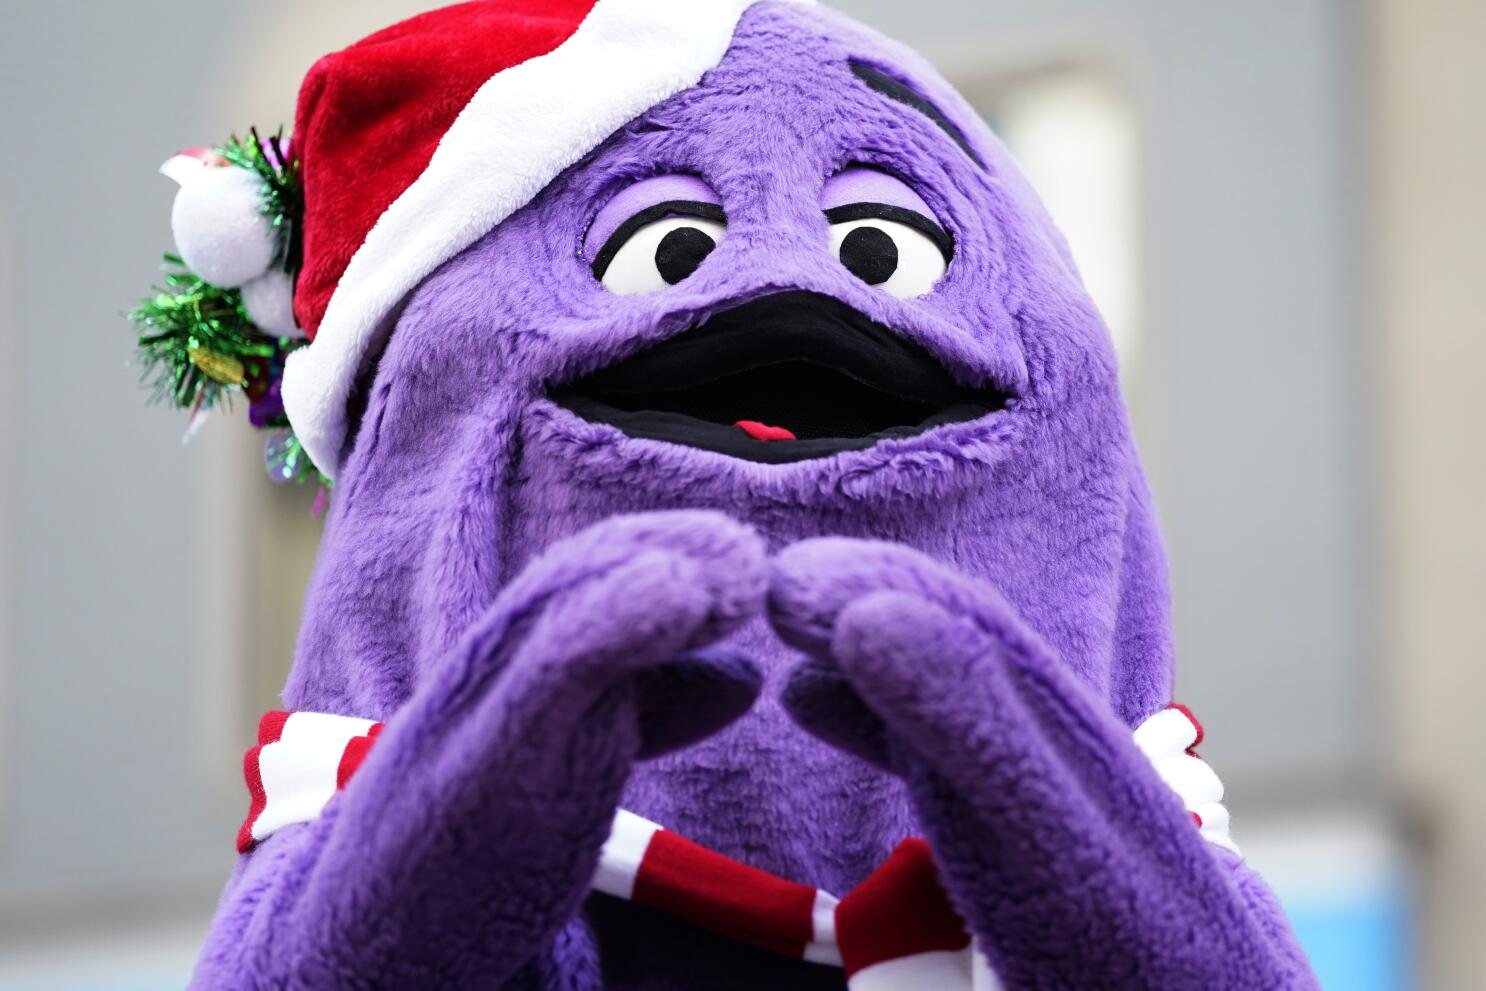 What's the internet's obsession with Grimace? - Los Angeles Times